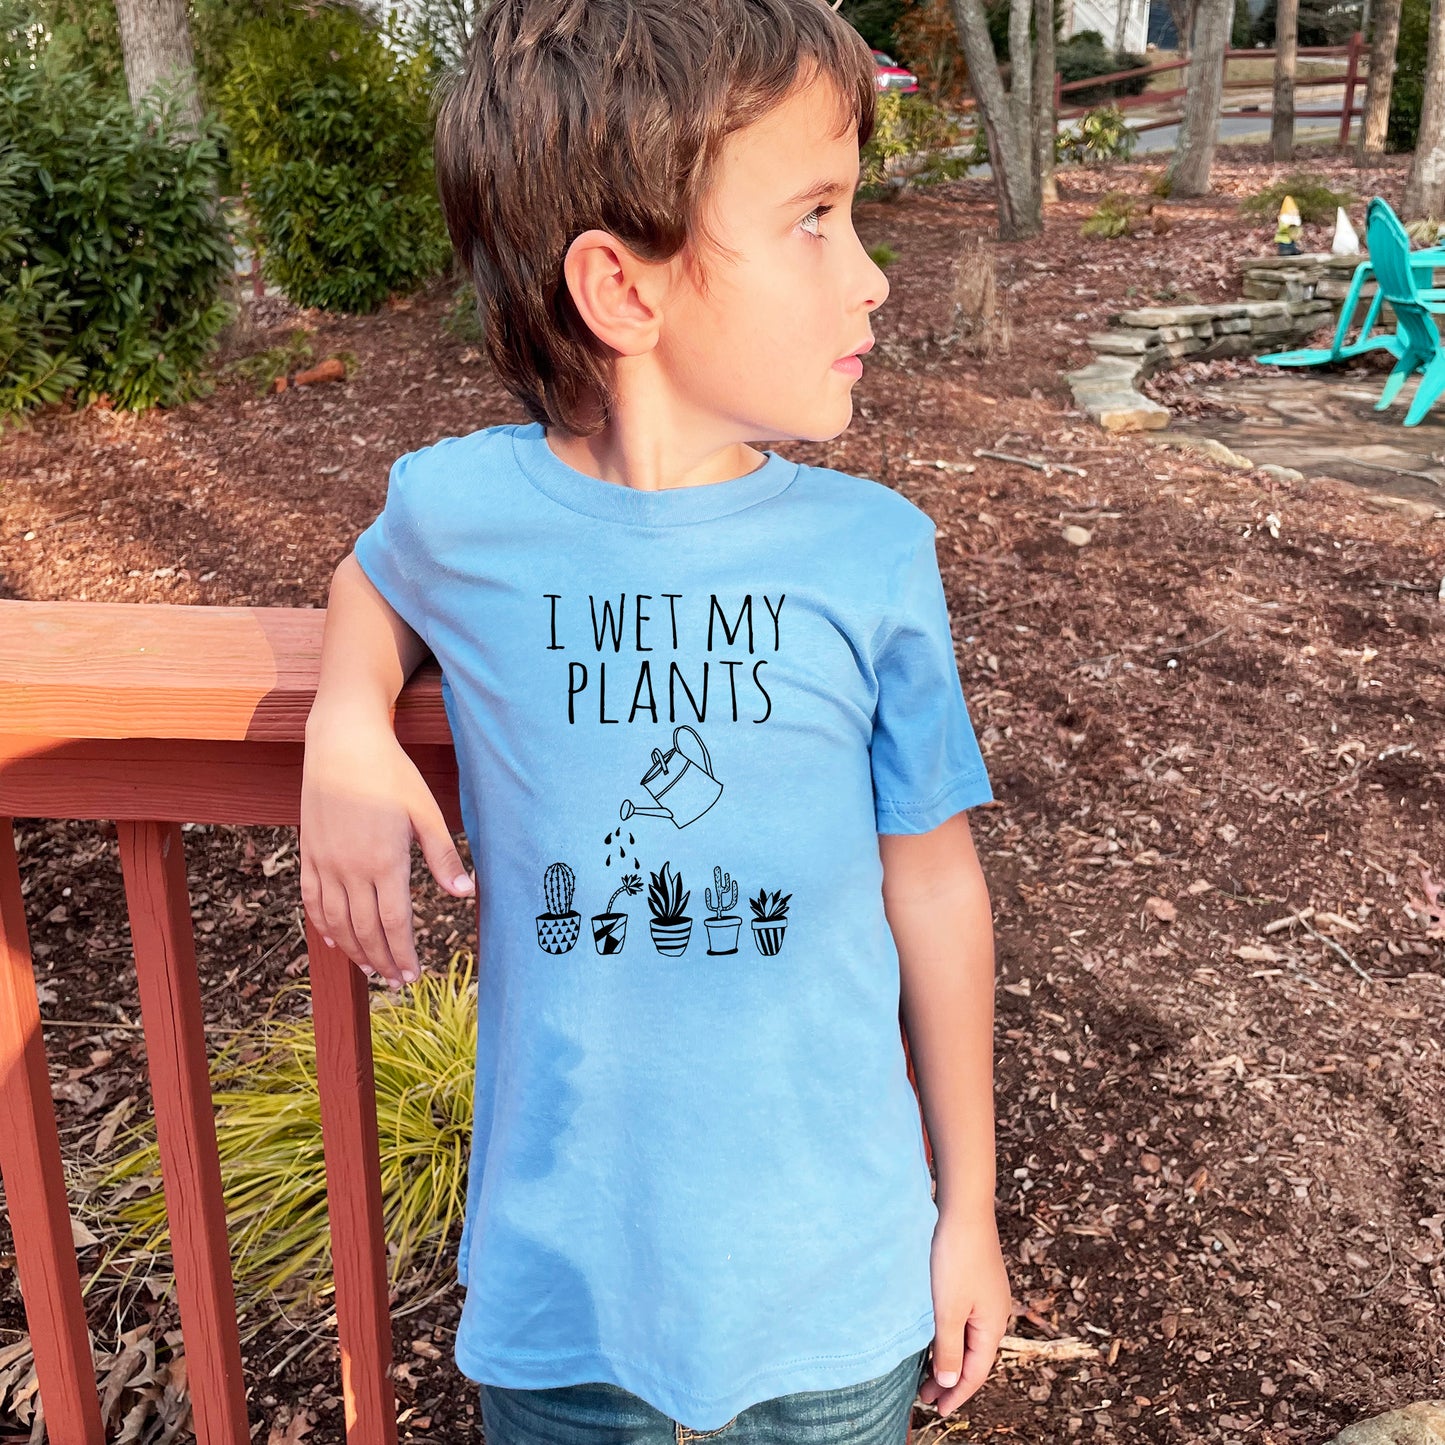 I Wet My Plants - Kid's Tee - Columbia Blue or Lavender